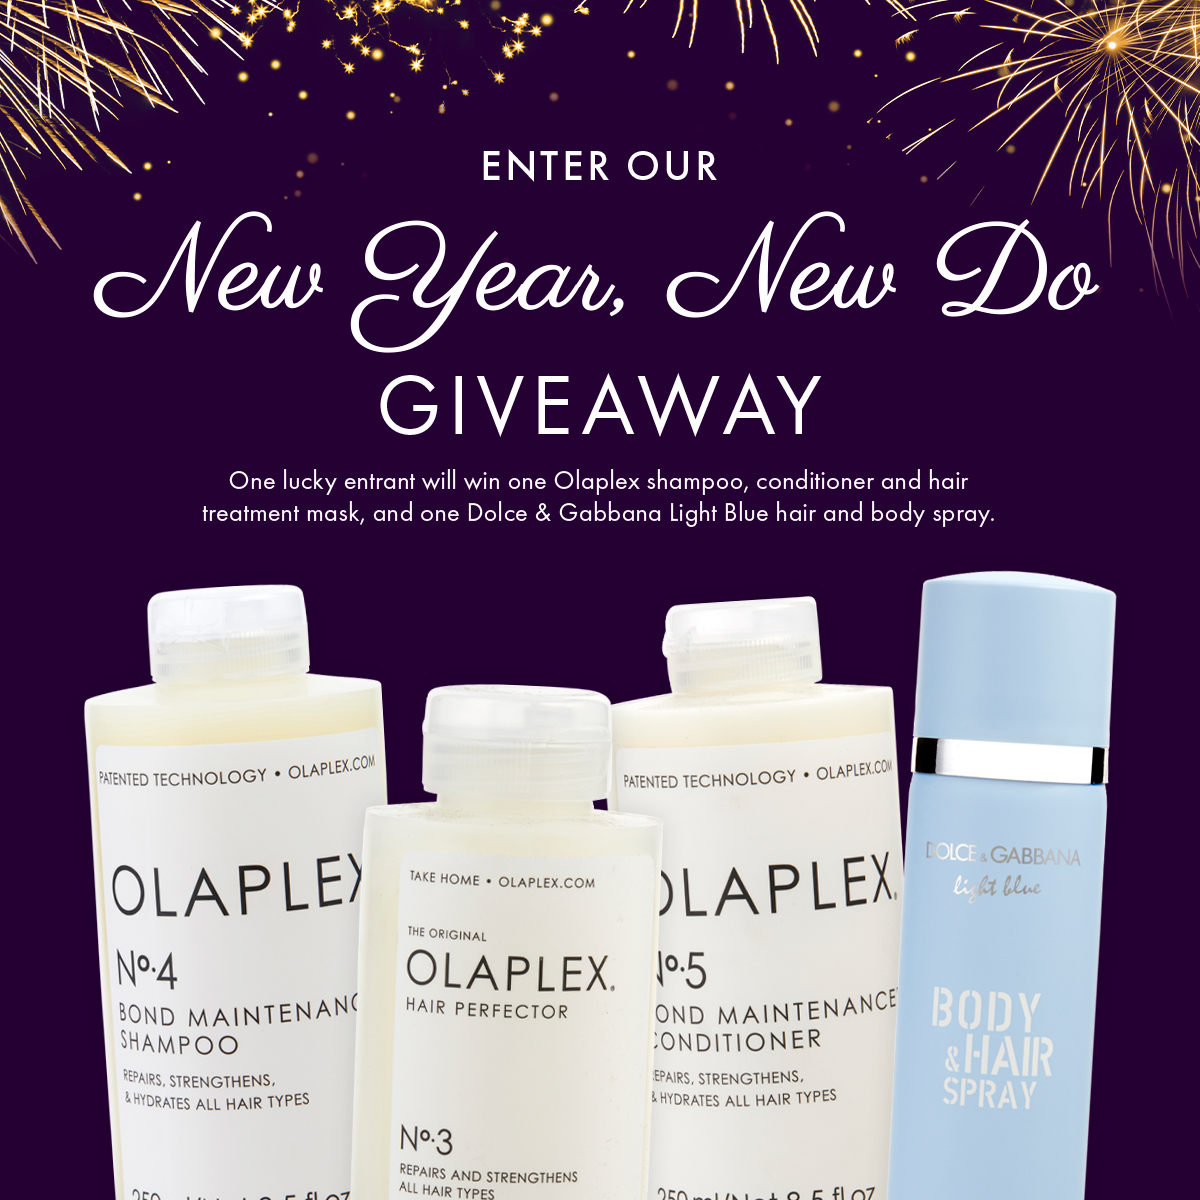 FragranceNet “New Year, New Do” Sweepstakes